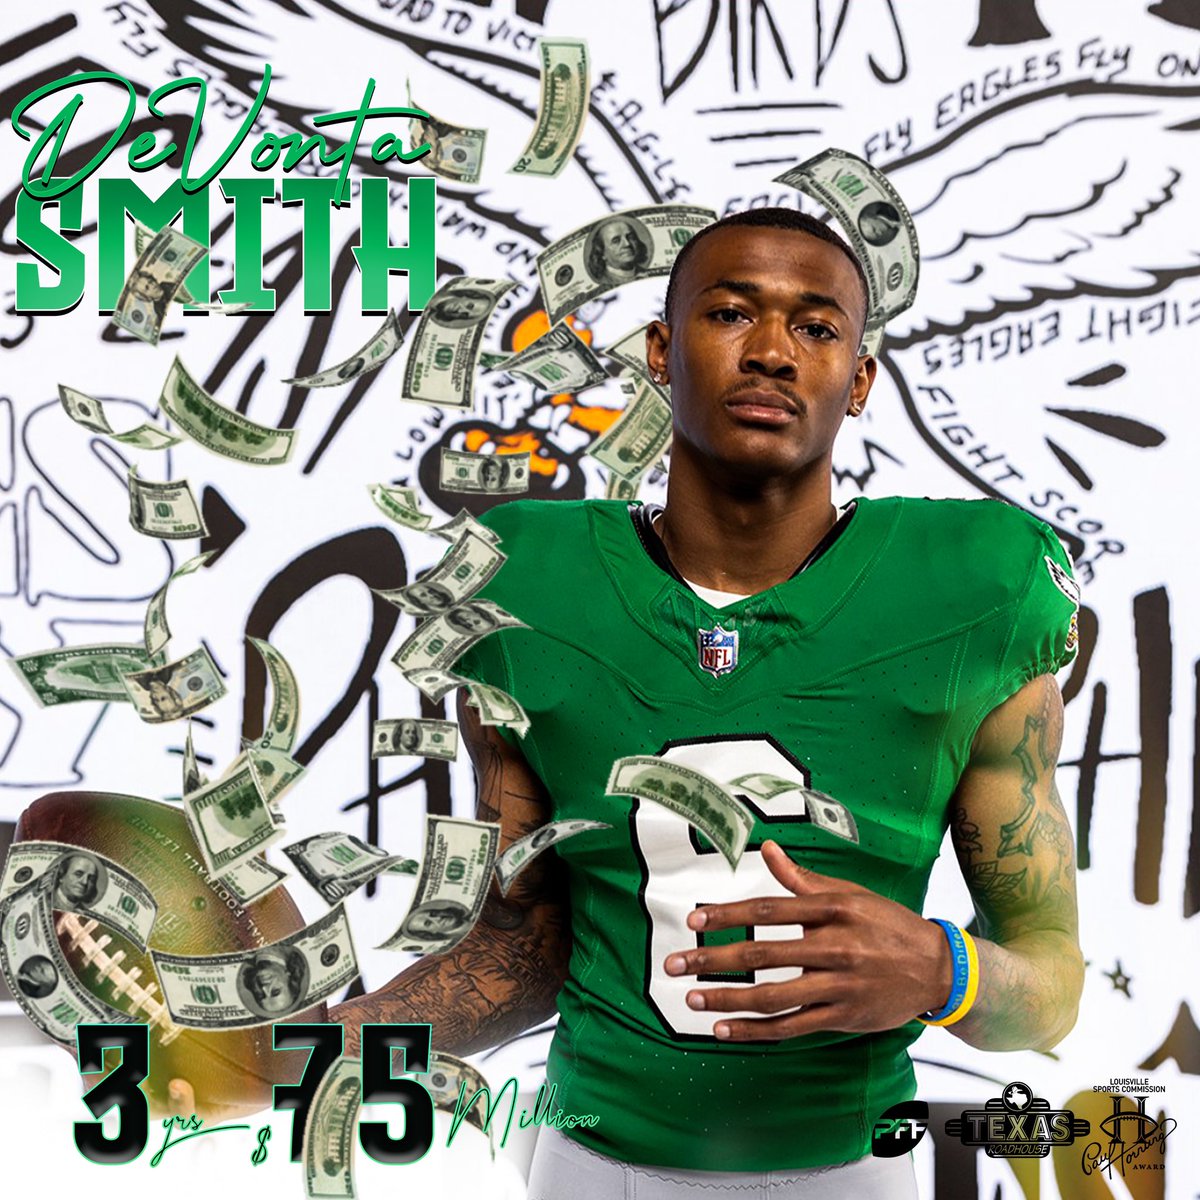 Congrats Devonta! We can’t wait to watch you guys light it up this season! #FlyEaglesFly @DeVontaSmith_6